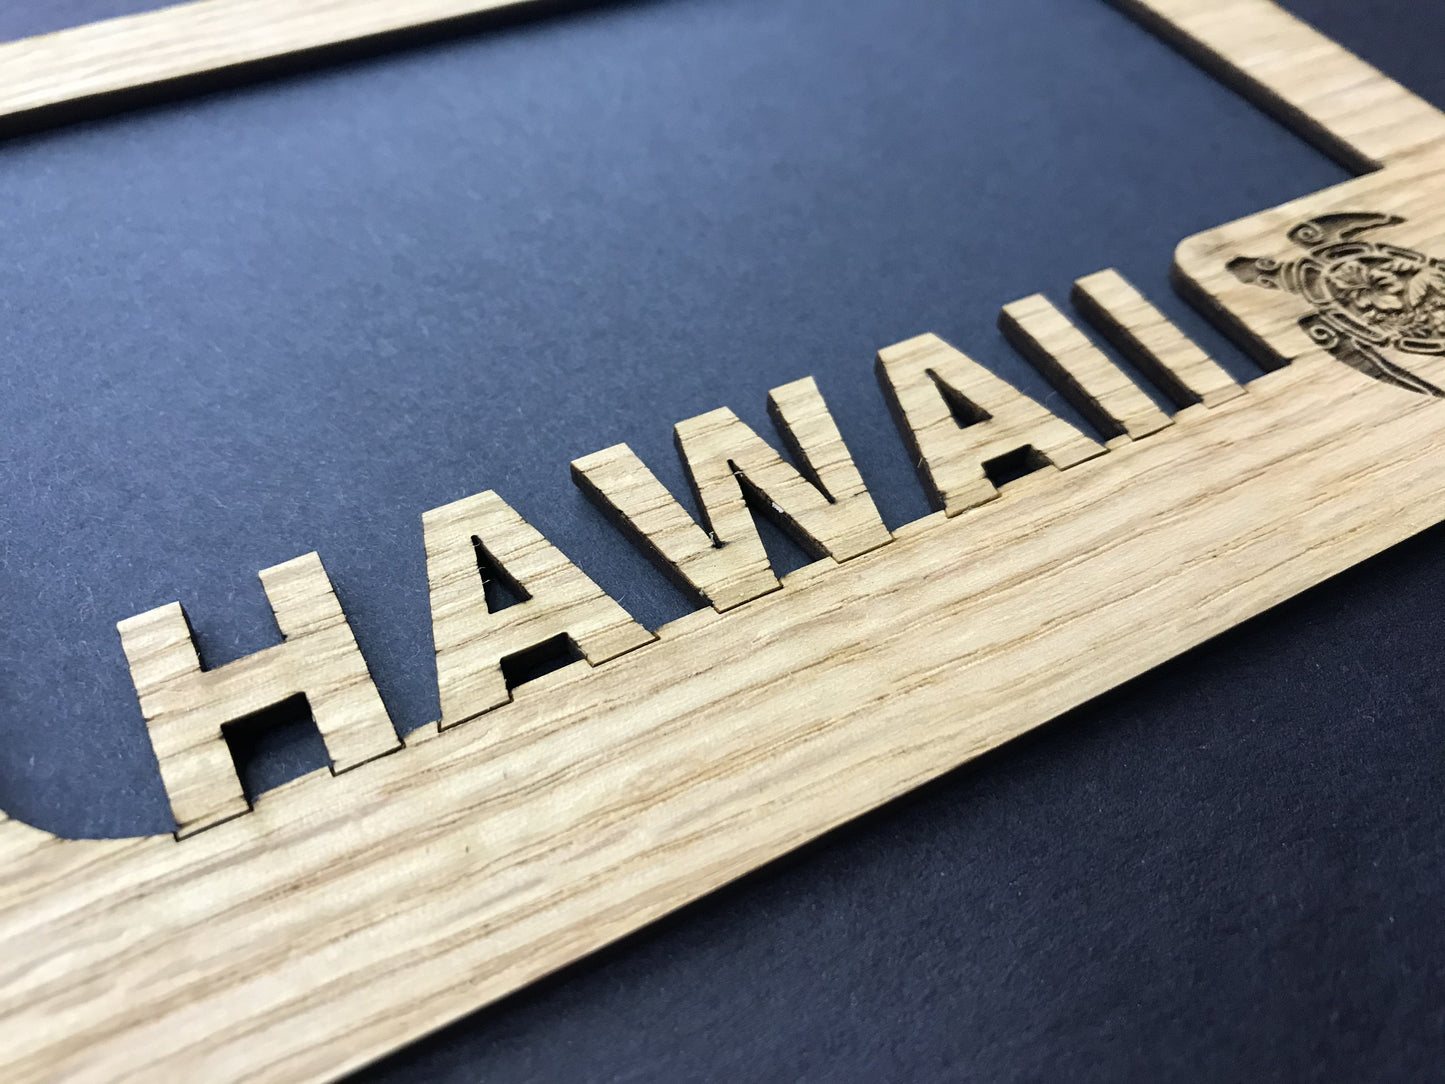 Hawaii Picture Frame